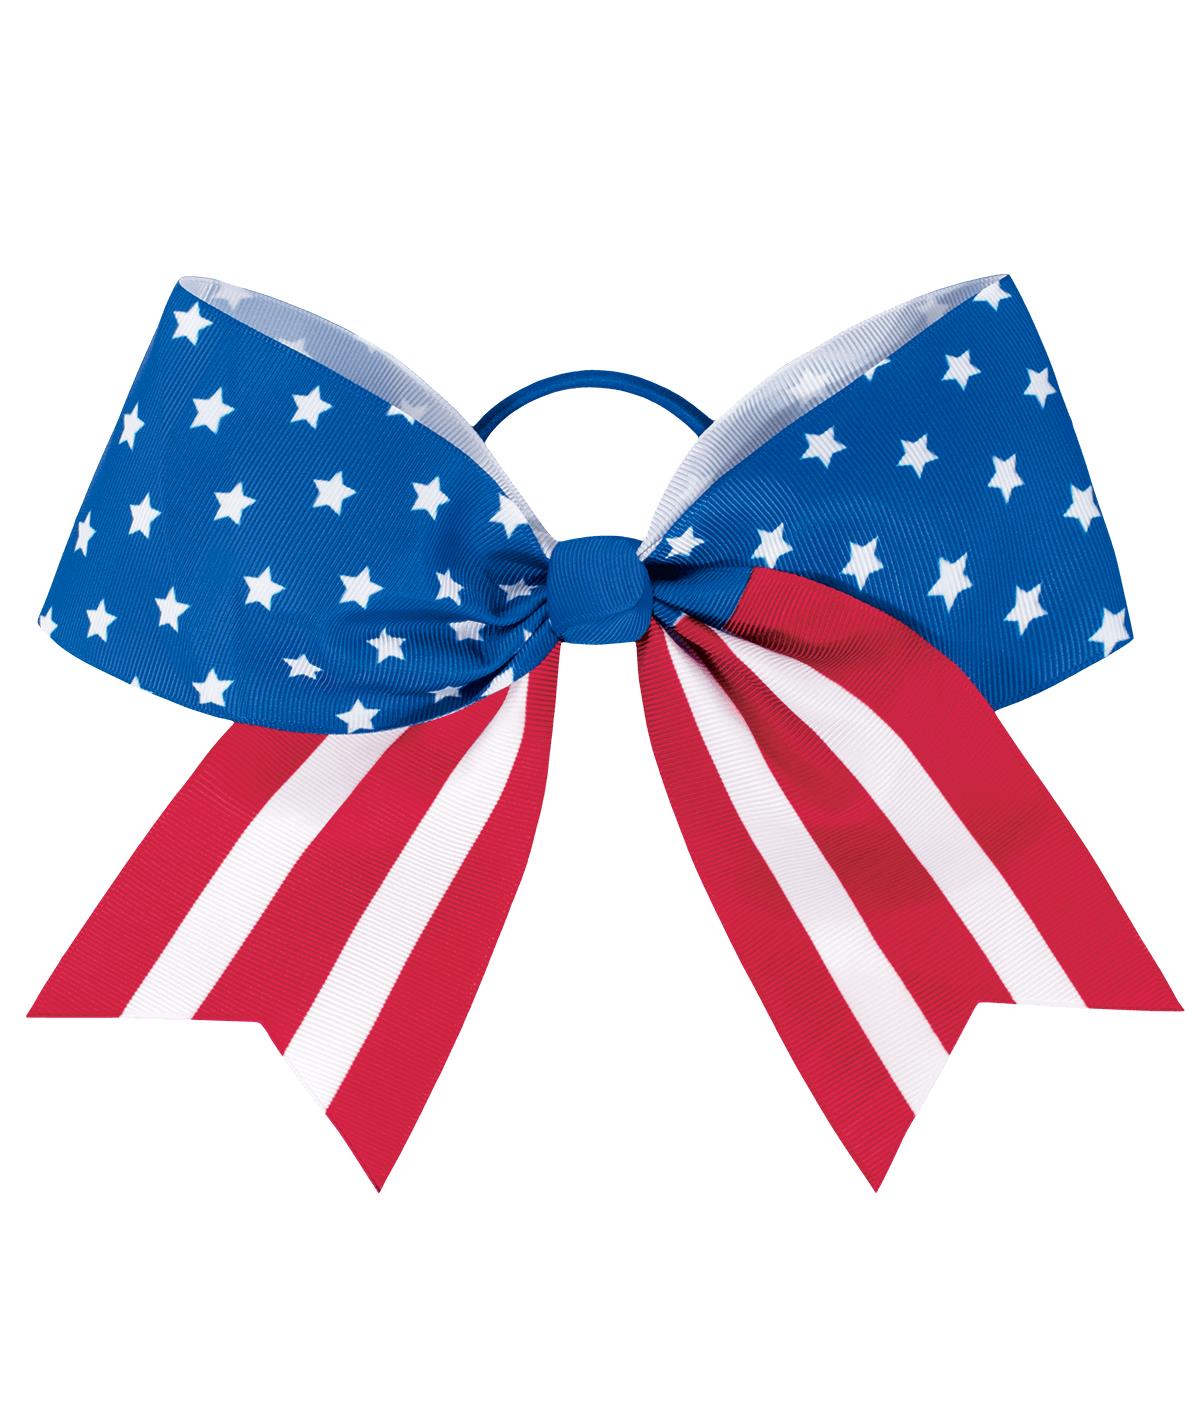 Glitter bow Fourth of July Medium double bow Red white and blue bow. American flag